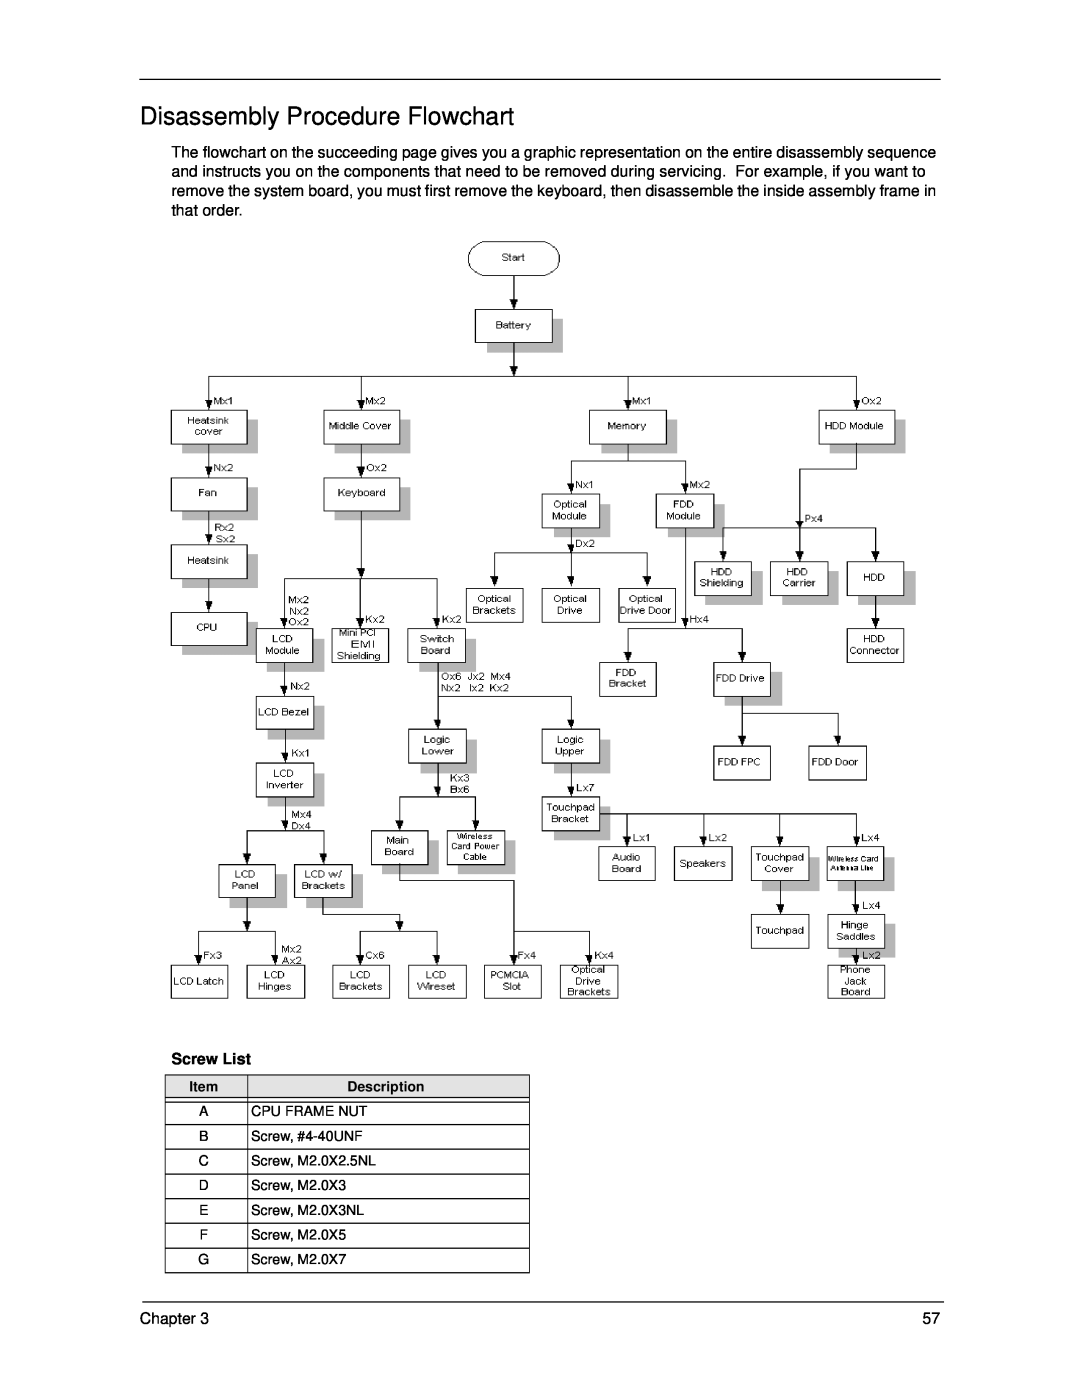 Acer 270 manual Disassembly Procedure Flowchart, Screw List 